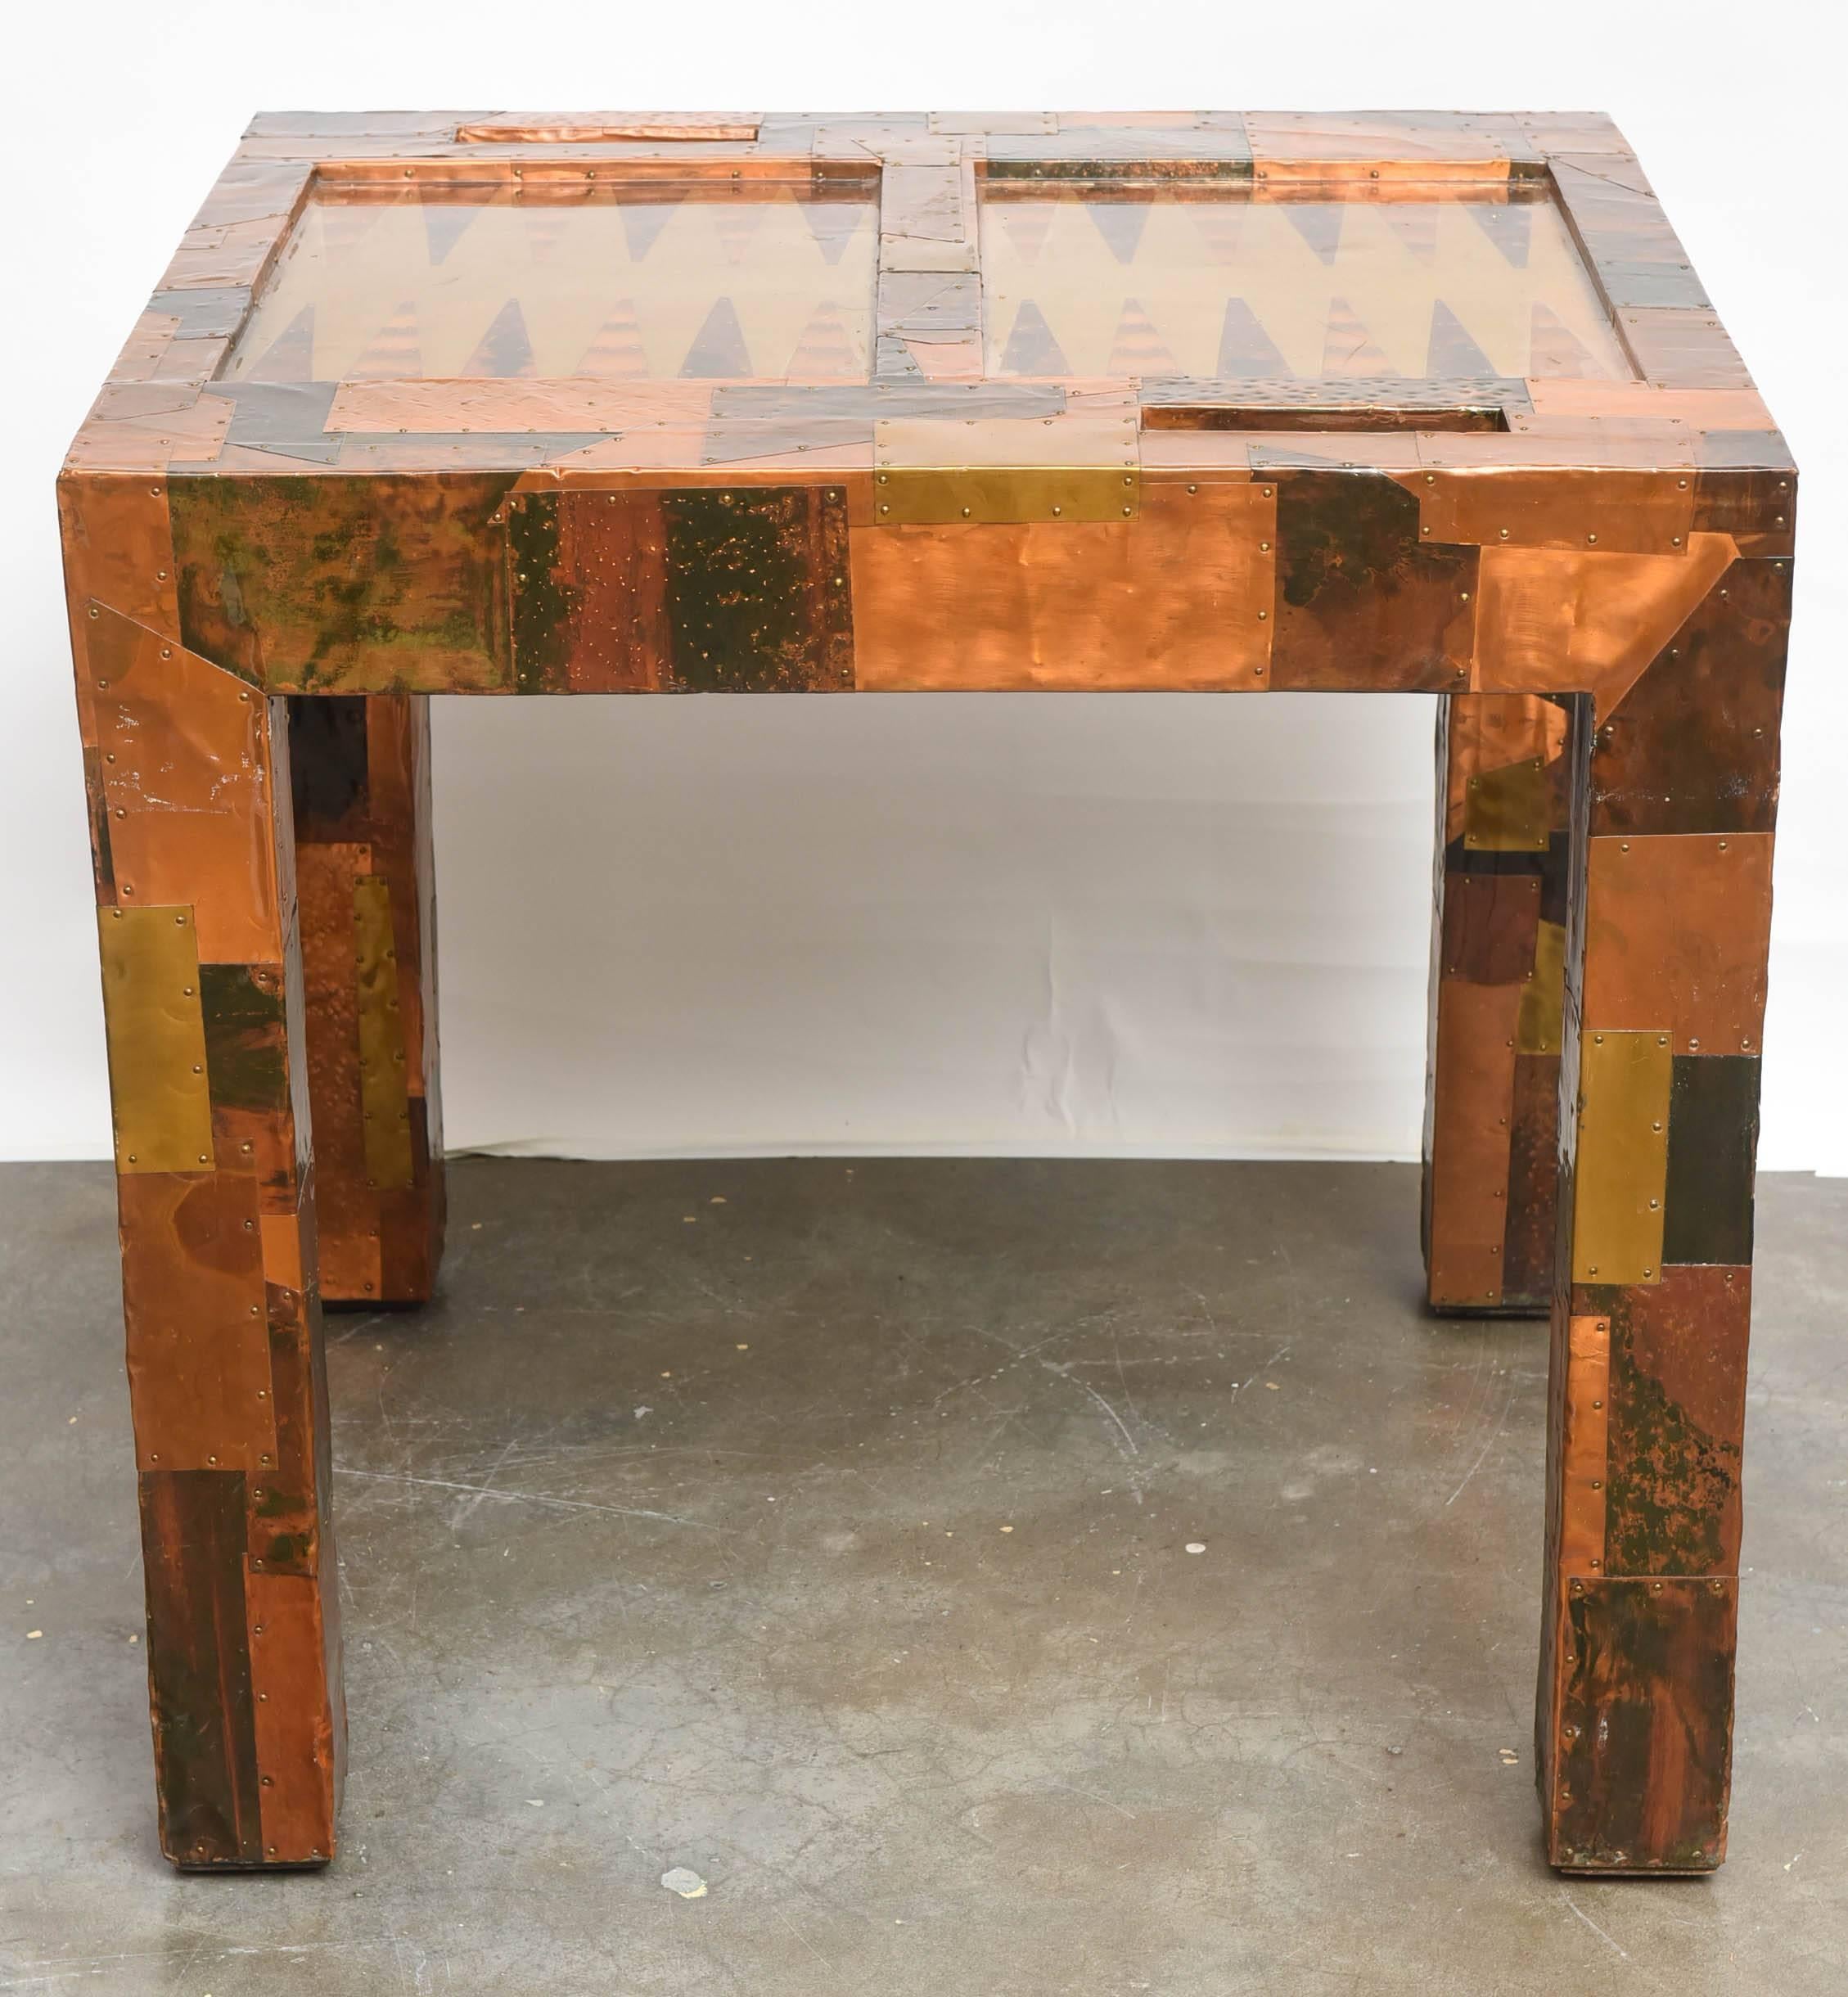 Paul Evans style patchwork metal clad backgammon table. Wonderfully handcrafted game table!